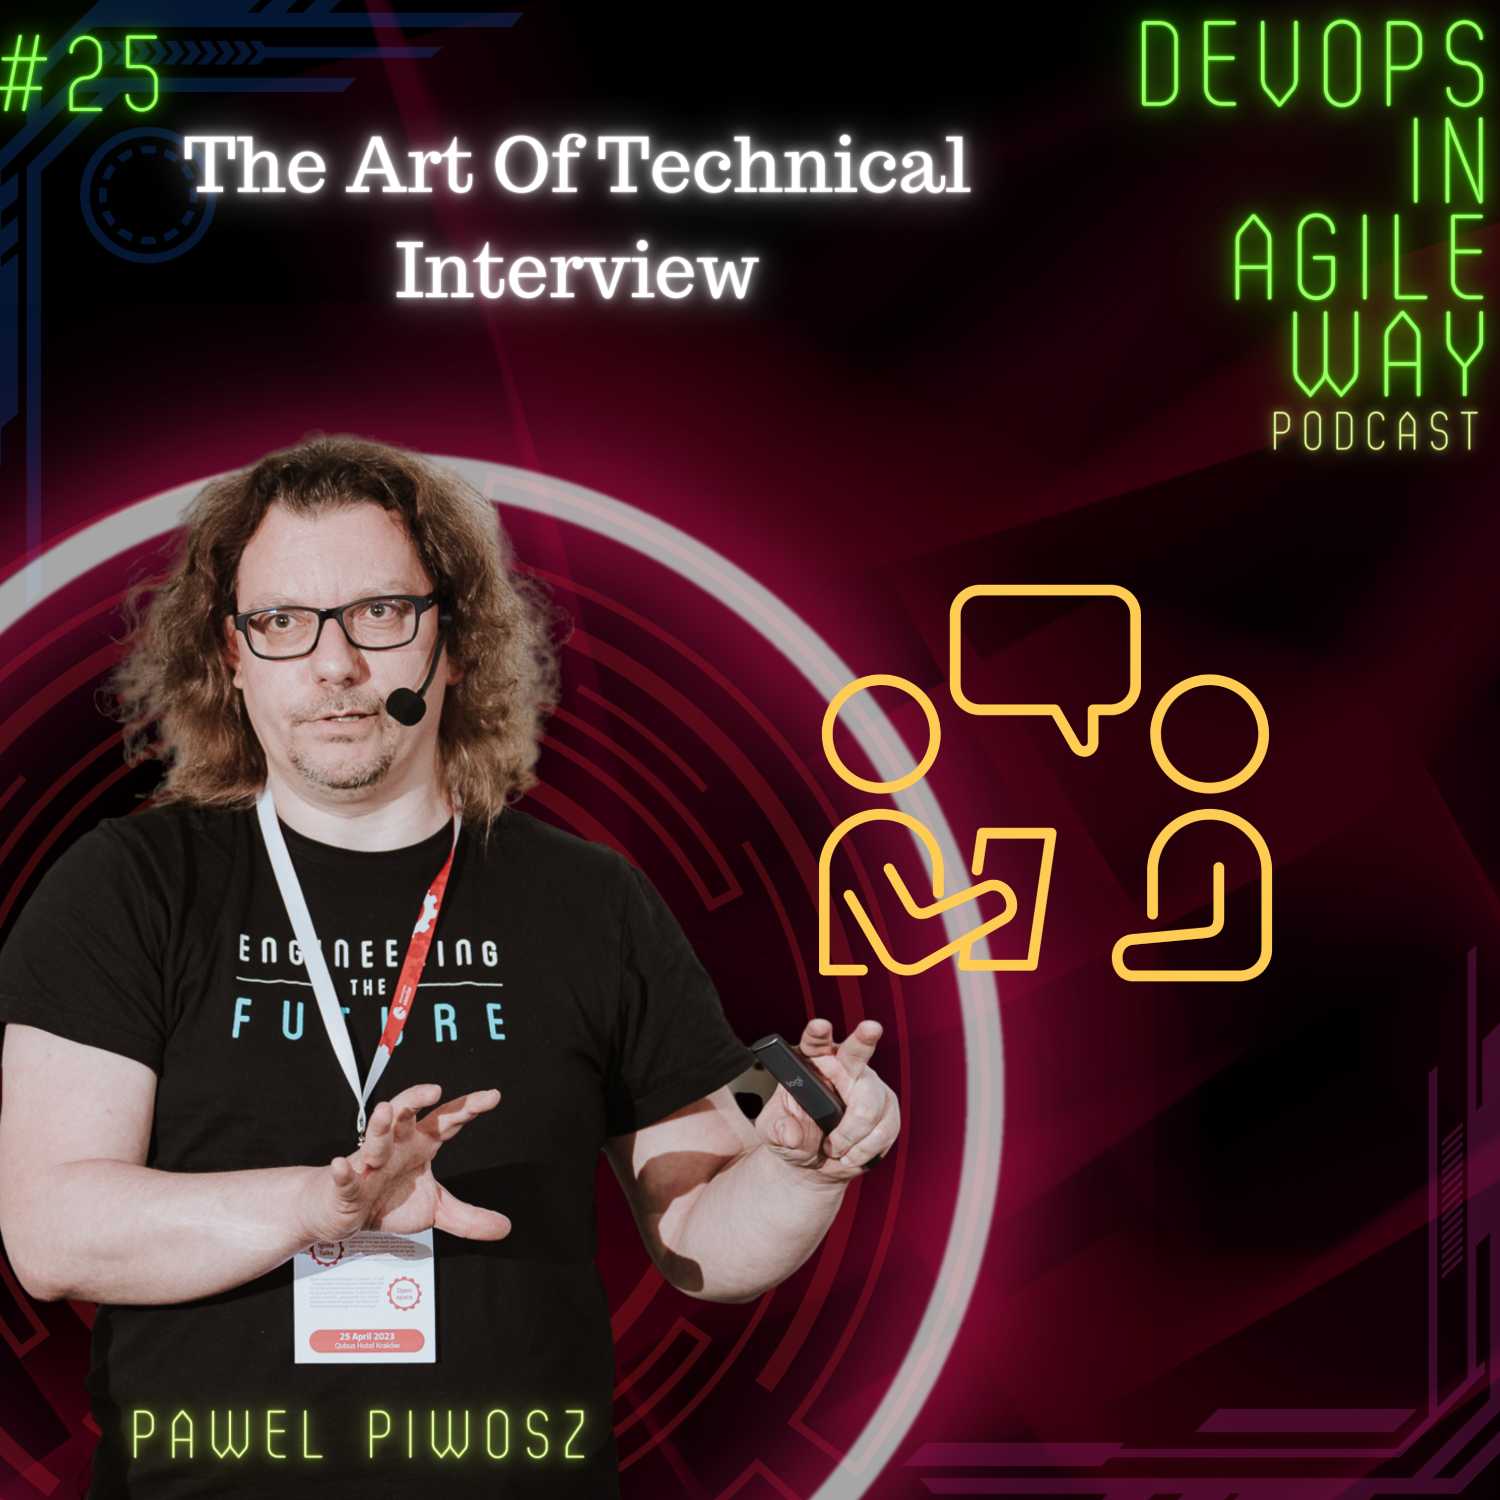 The Art Of Technical Interview